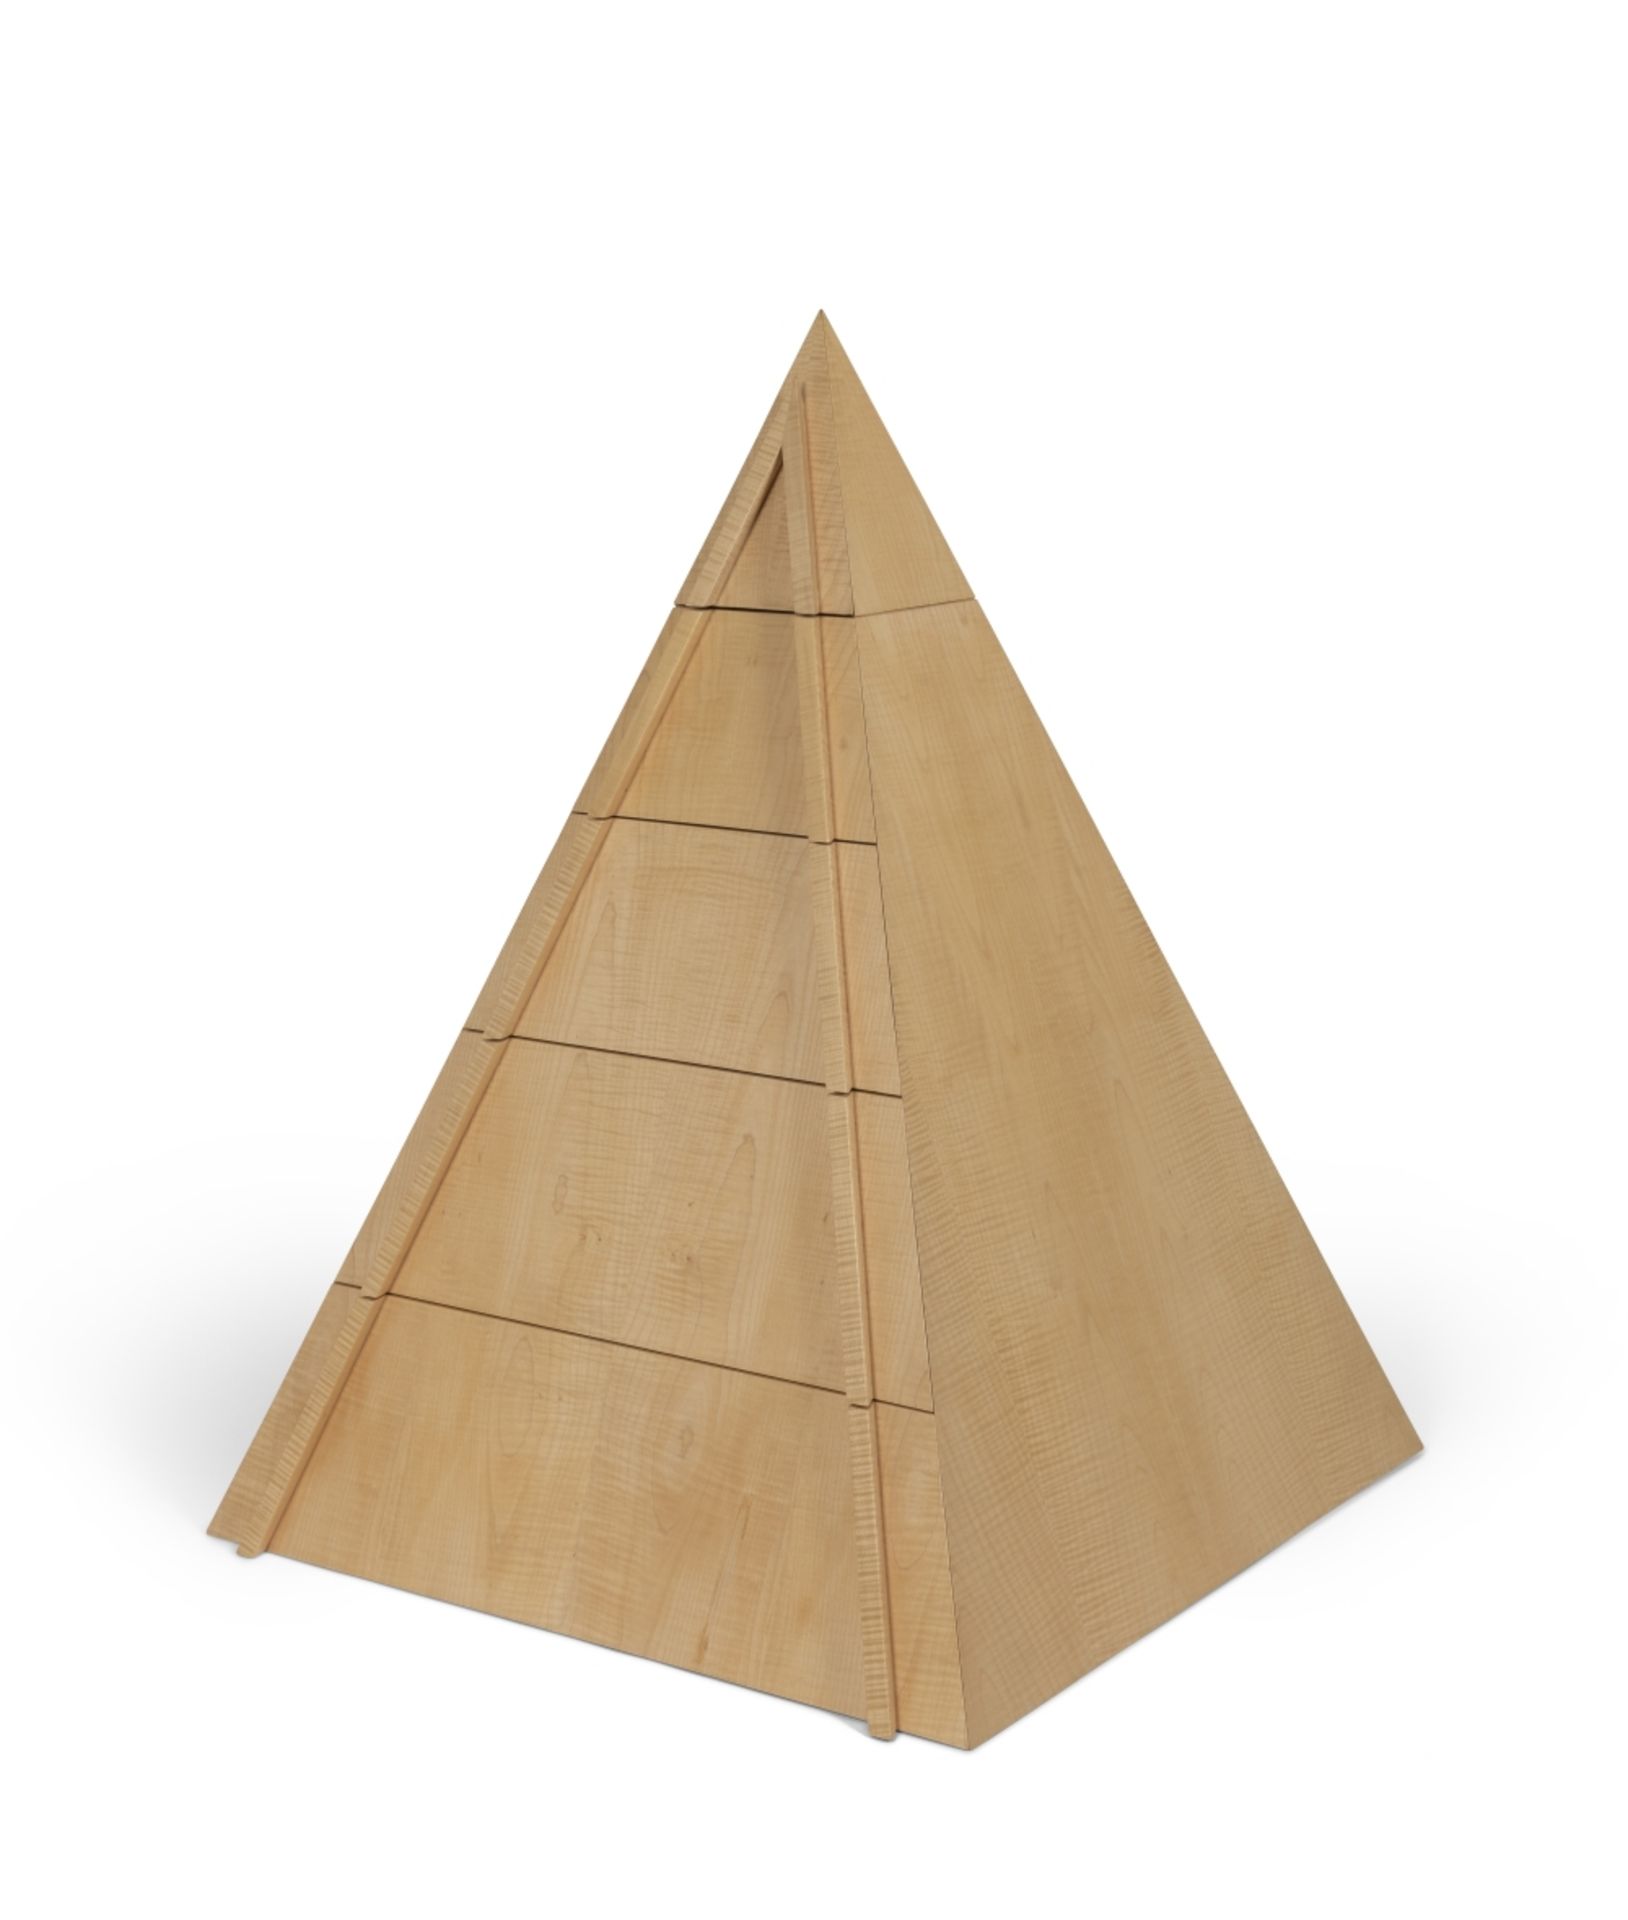 A ripple sycamore 'Pyramid' cabinet Designed by Sir Terence Conran, made by Benchmark Furniture